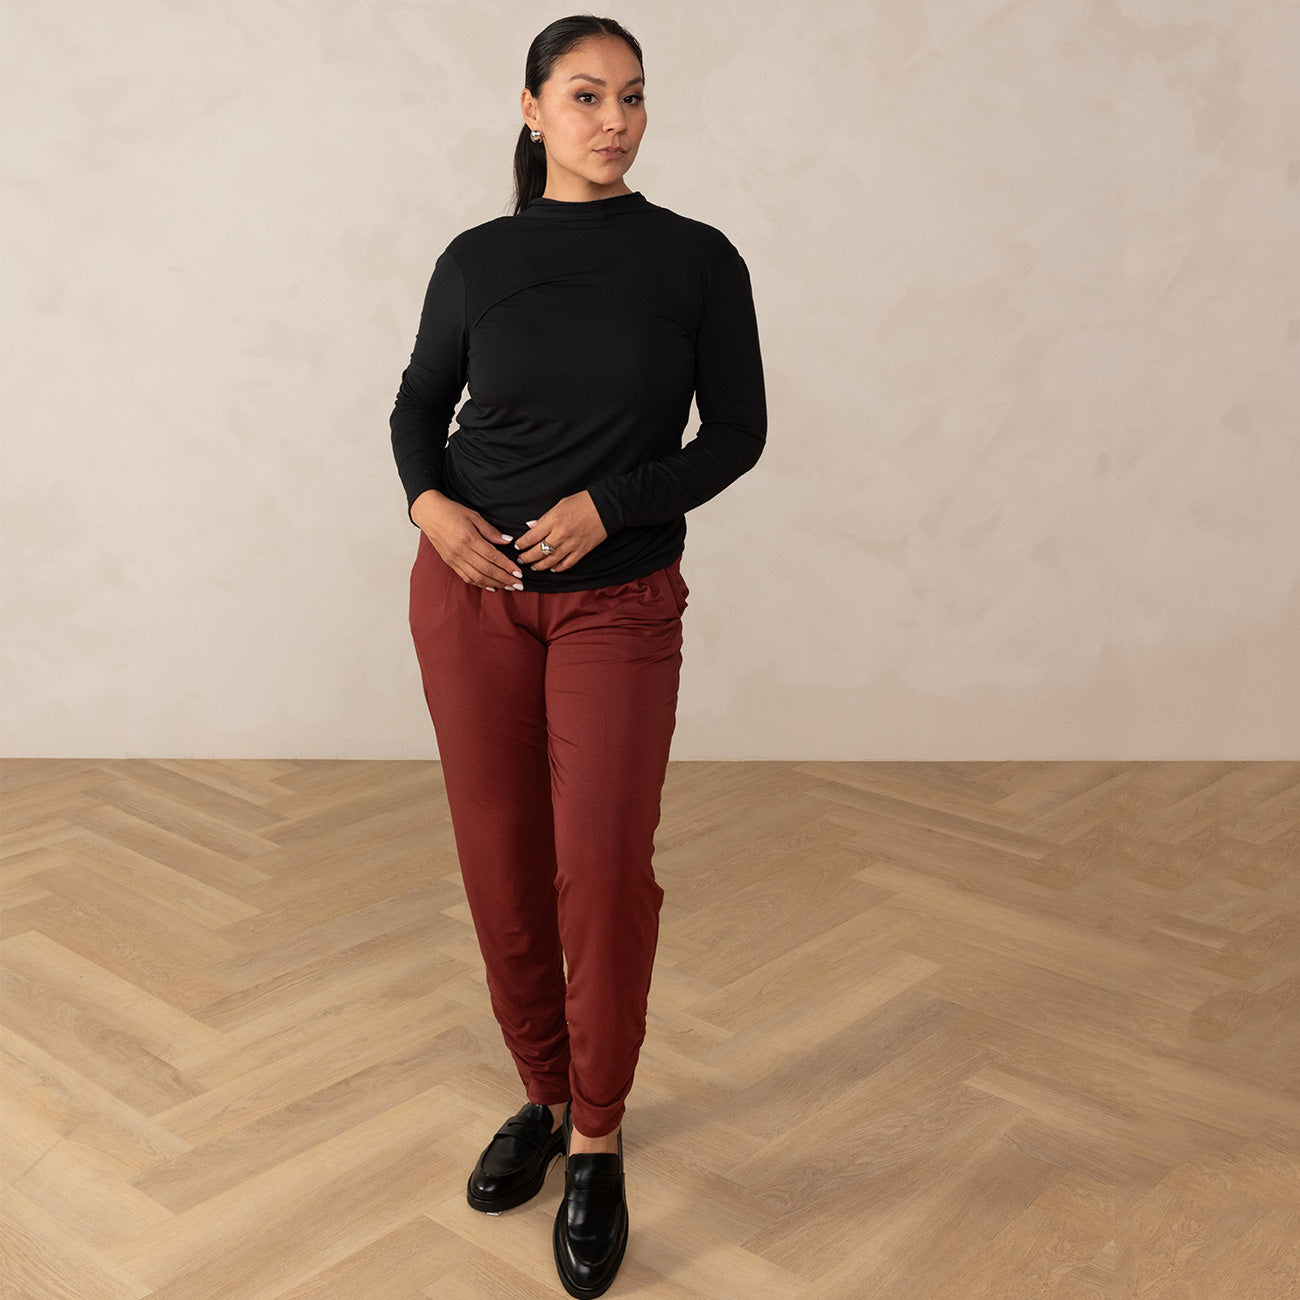 Woman wearing long sleeve black top with red relaxed pants